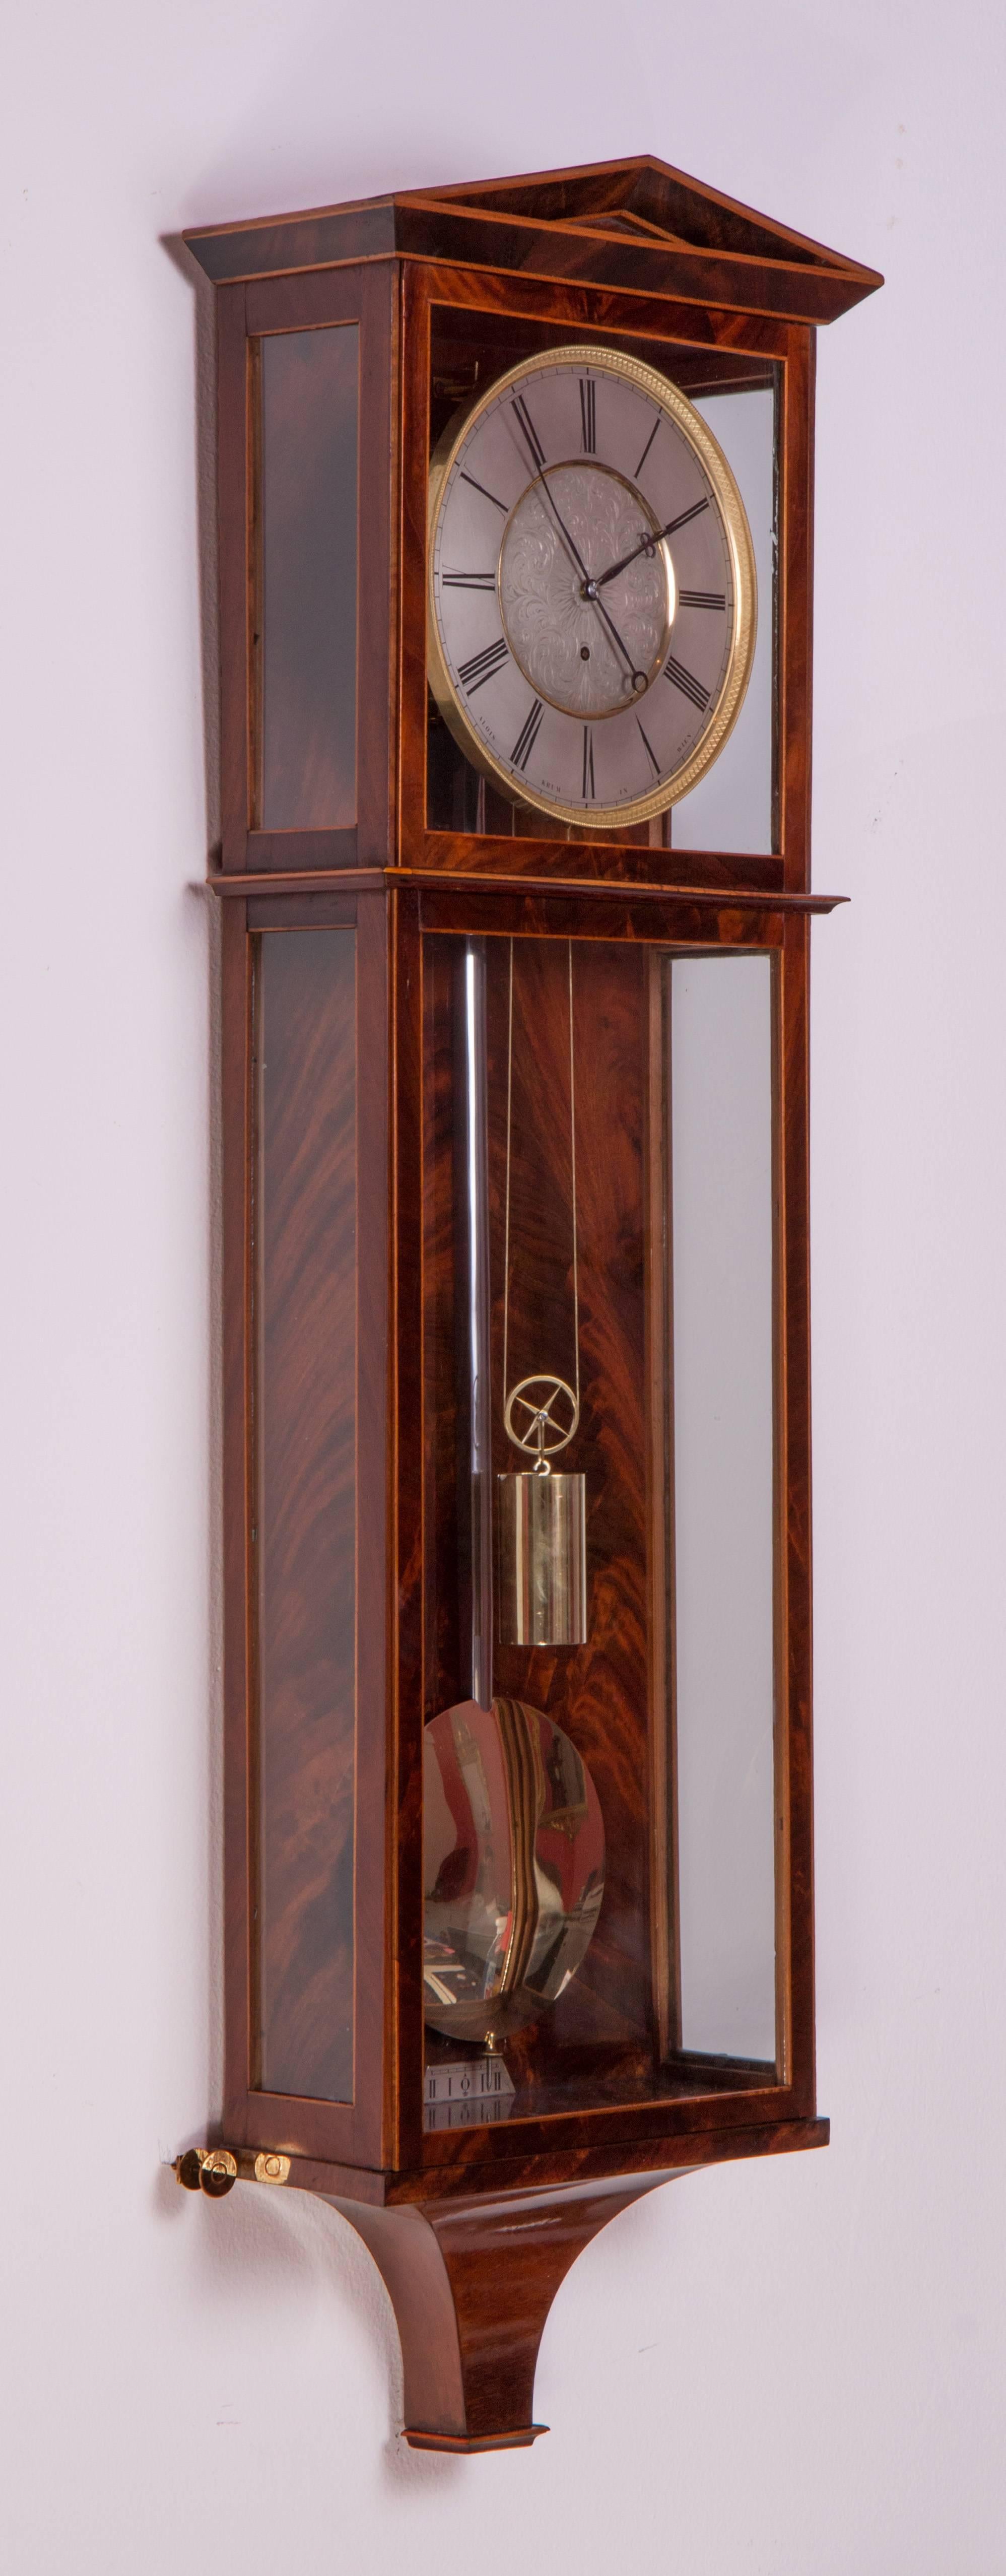 Signed: „Alois Krum in Wien“
Length: 89 cm, duration: eight days
Mahogany veneered case with maple stringing, silvered and engraved metal dial, blued steel hands, gilt inner ring and engine turned gilt bezel, deadbeat escapement, spring